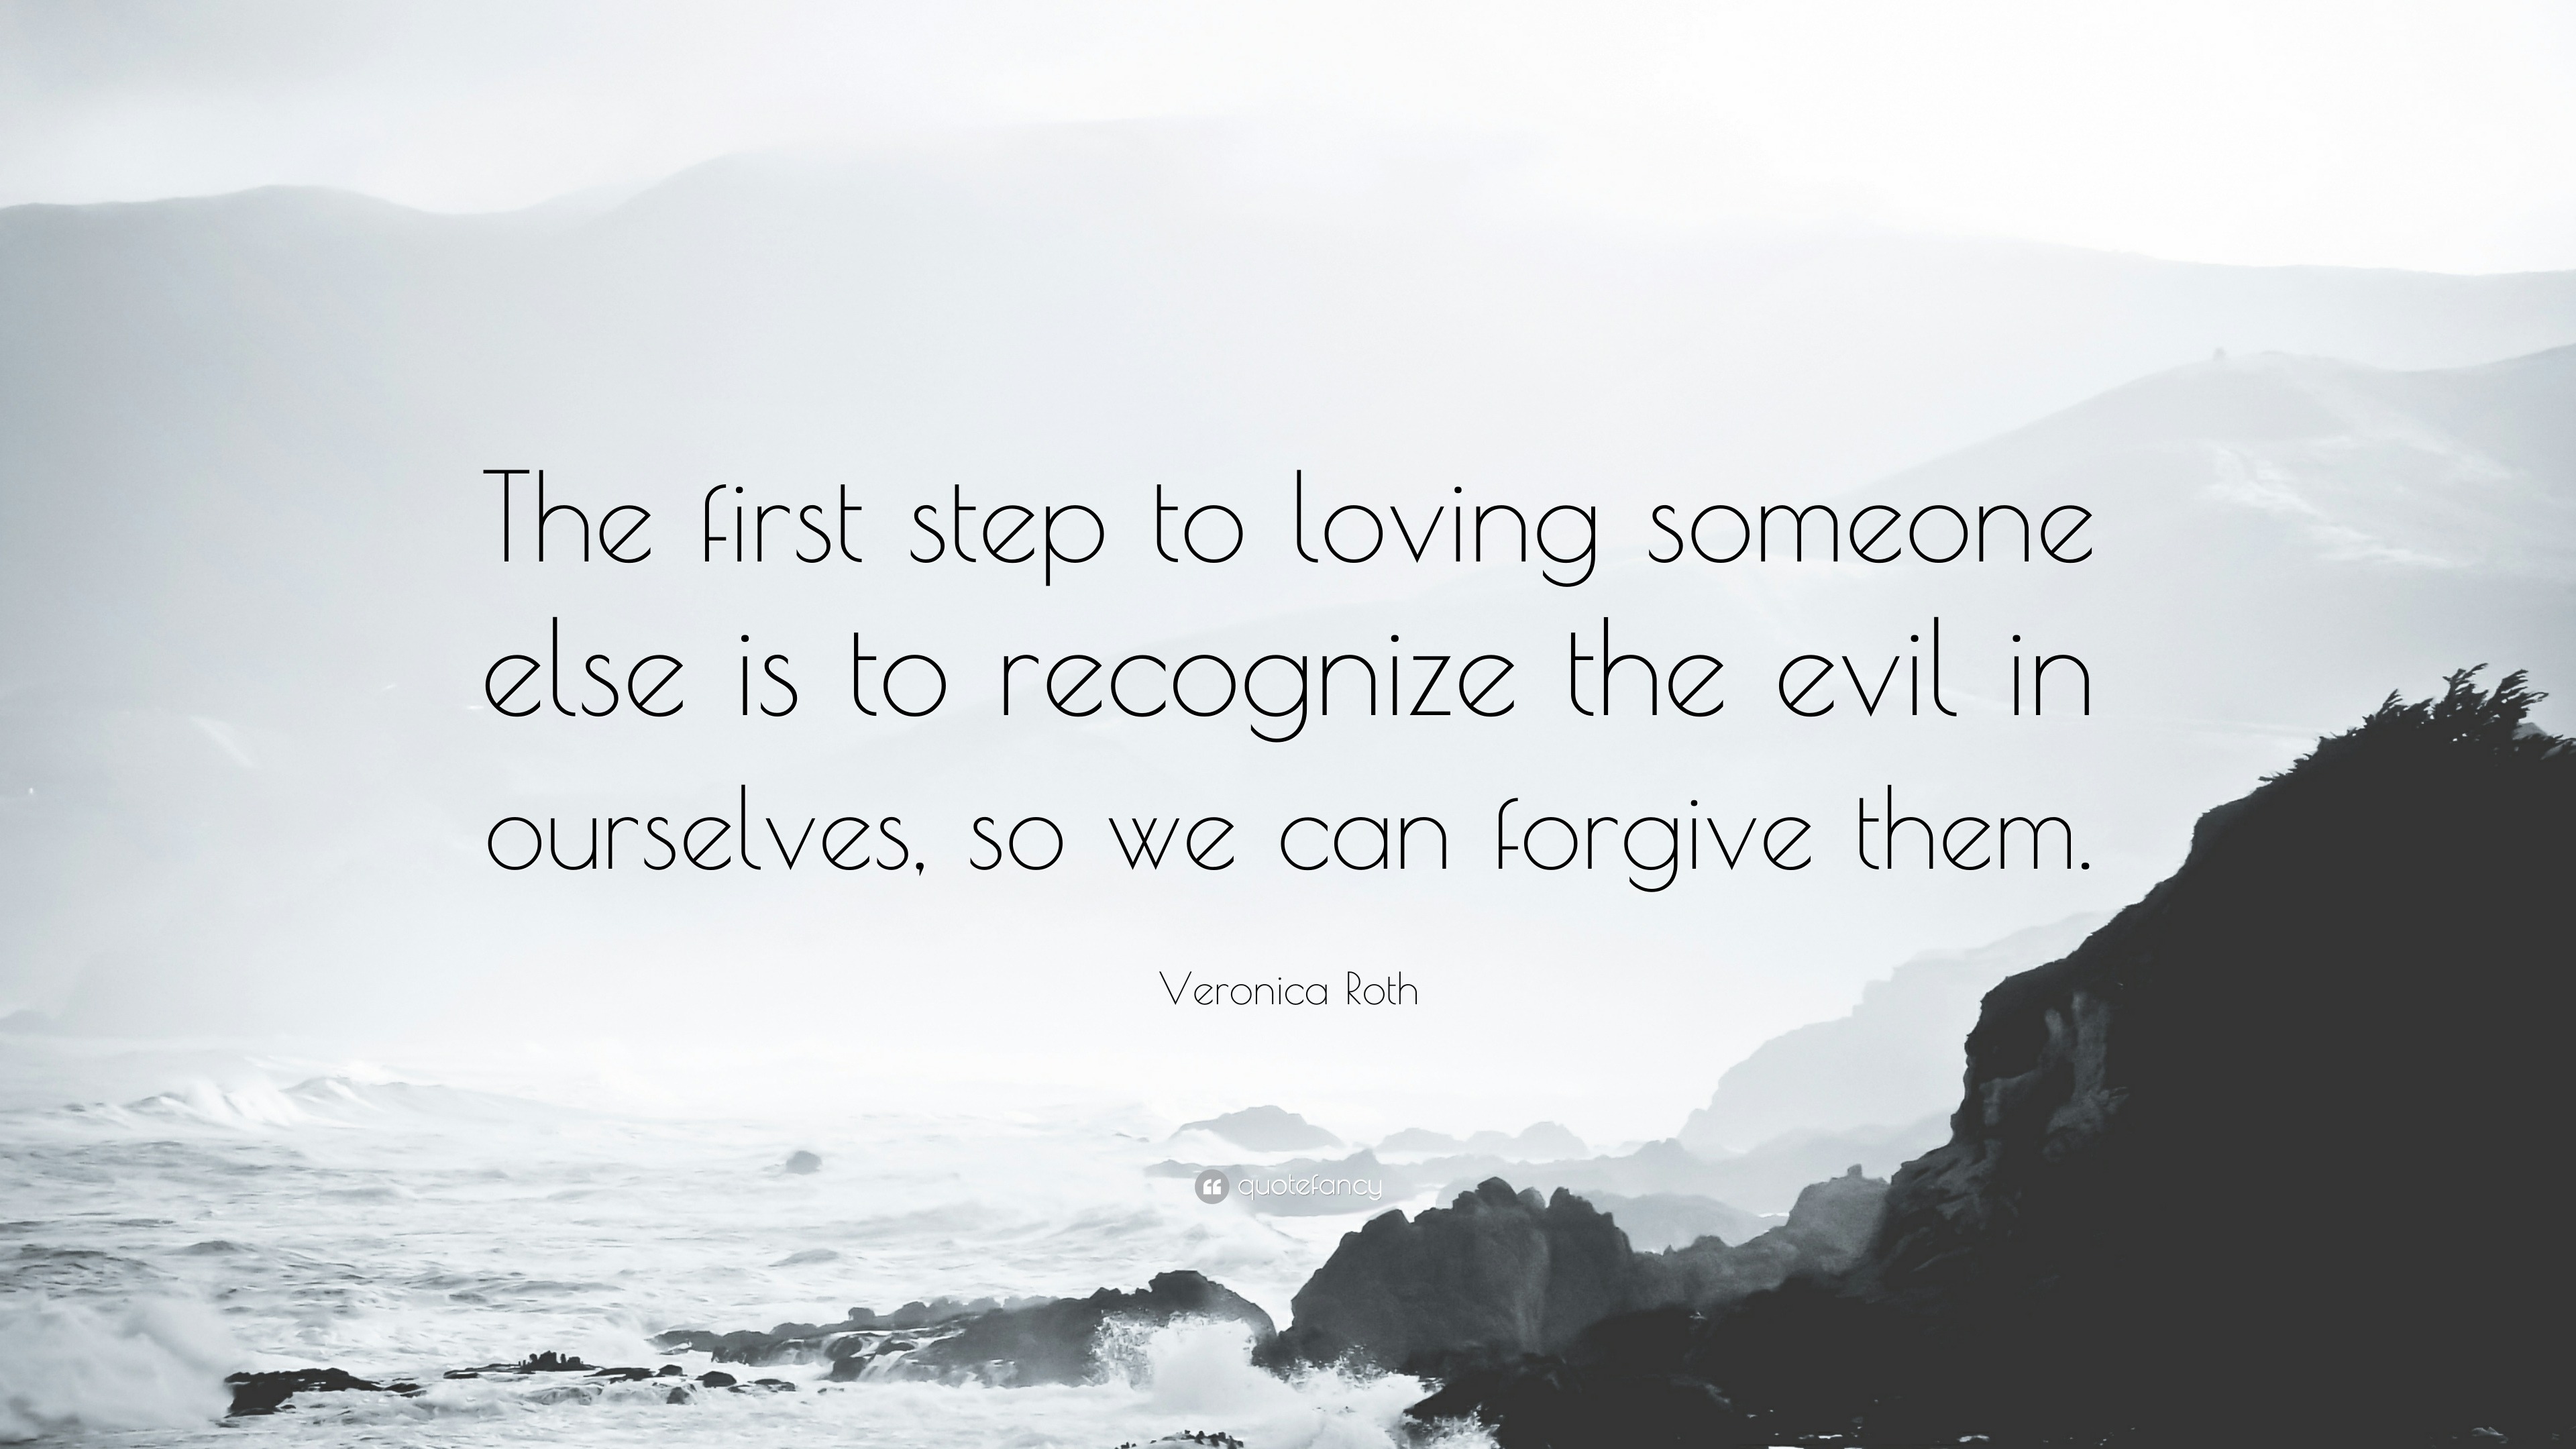 Veronica Roth Quote “The first step to loving someone else is to recognize the